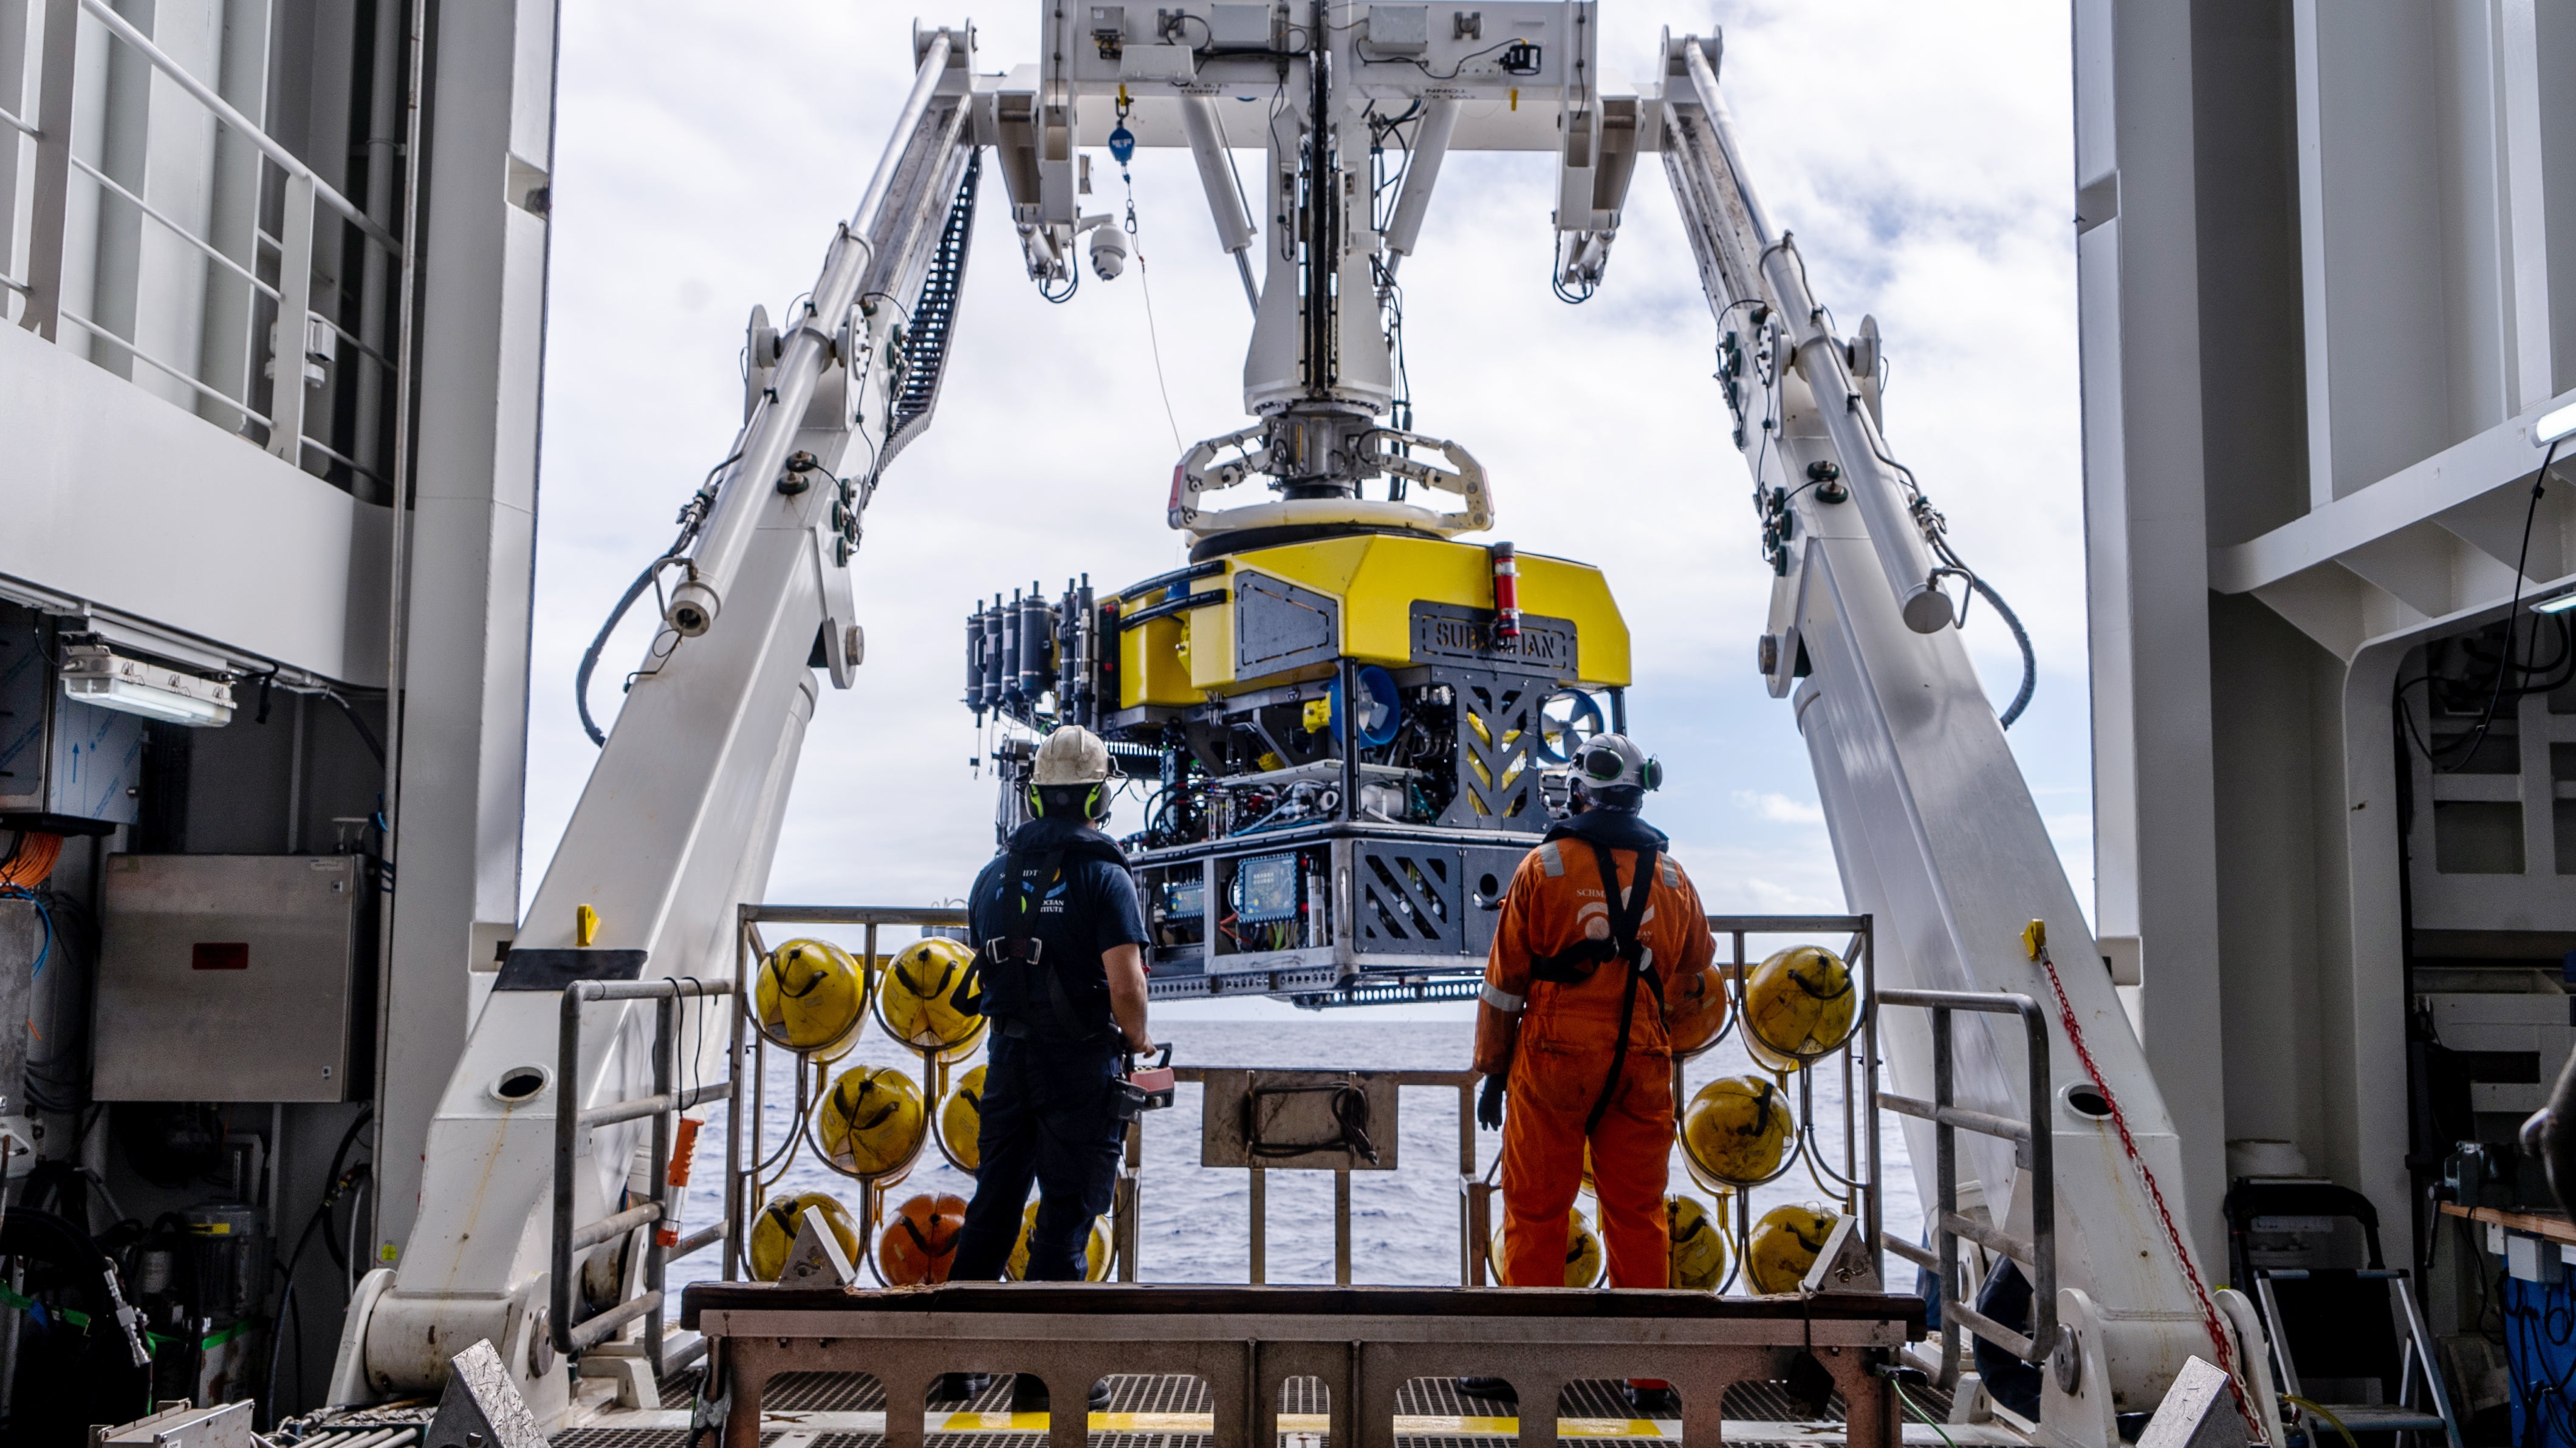 The vents were mapped using a robot known as a remotely operated vehicle, or ROV. In this photo, the ROV, dubbed SuBastian, is pulled out of the water after being in the ocean for 13 hours. The ROV was connected by a cord to the ship, allowing it to stay plugged into power and trasmit video. (Photo: Mónika Naranjo-Shepherd / Schmidt Ocean Institute)